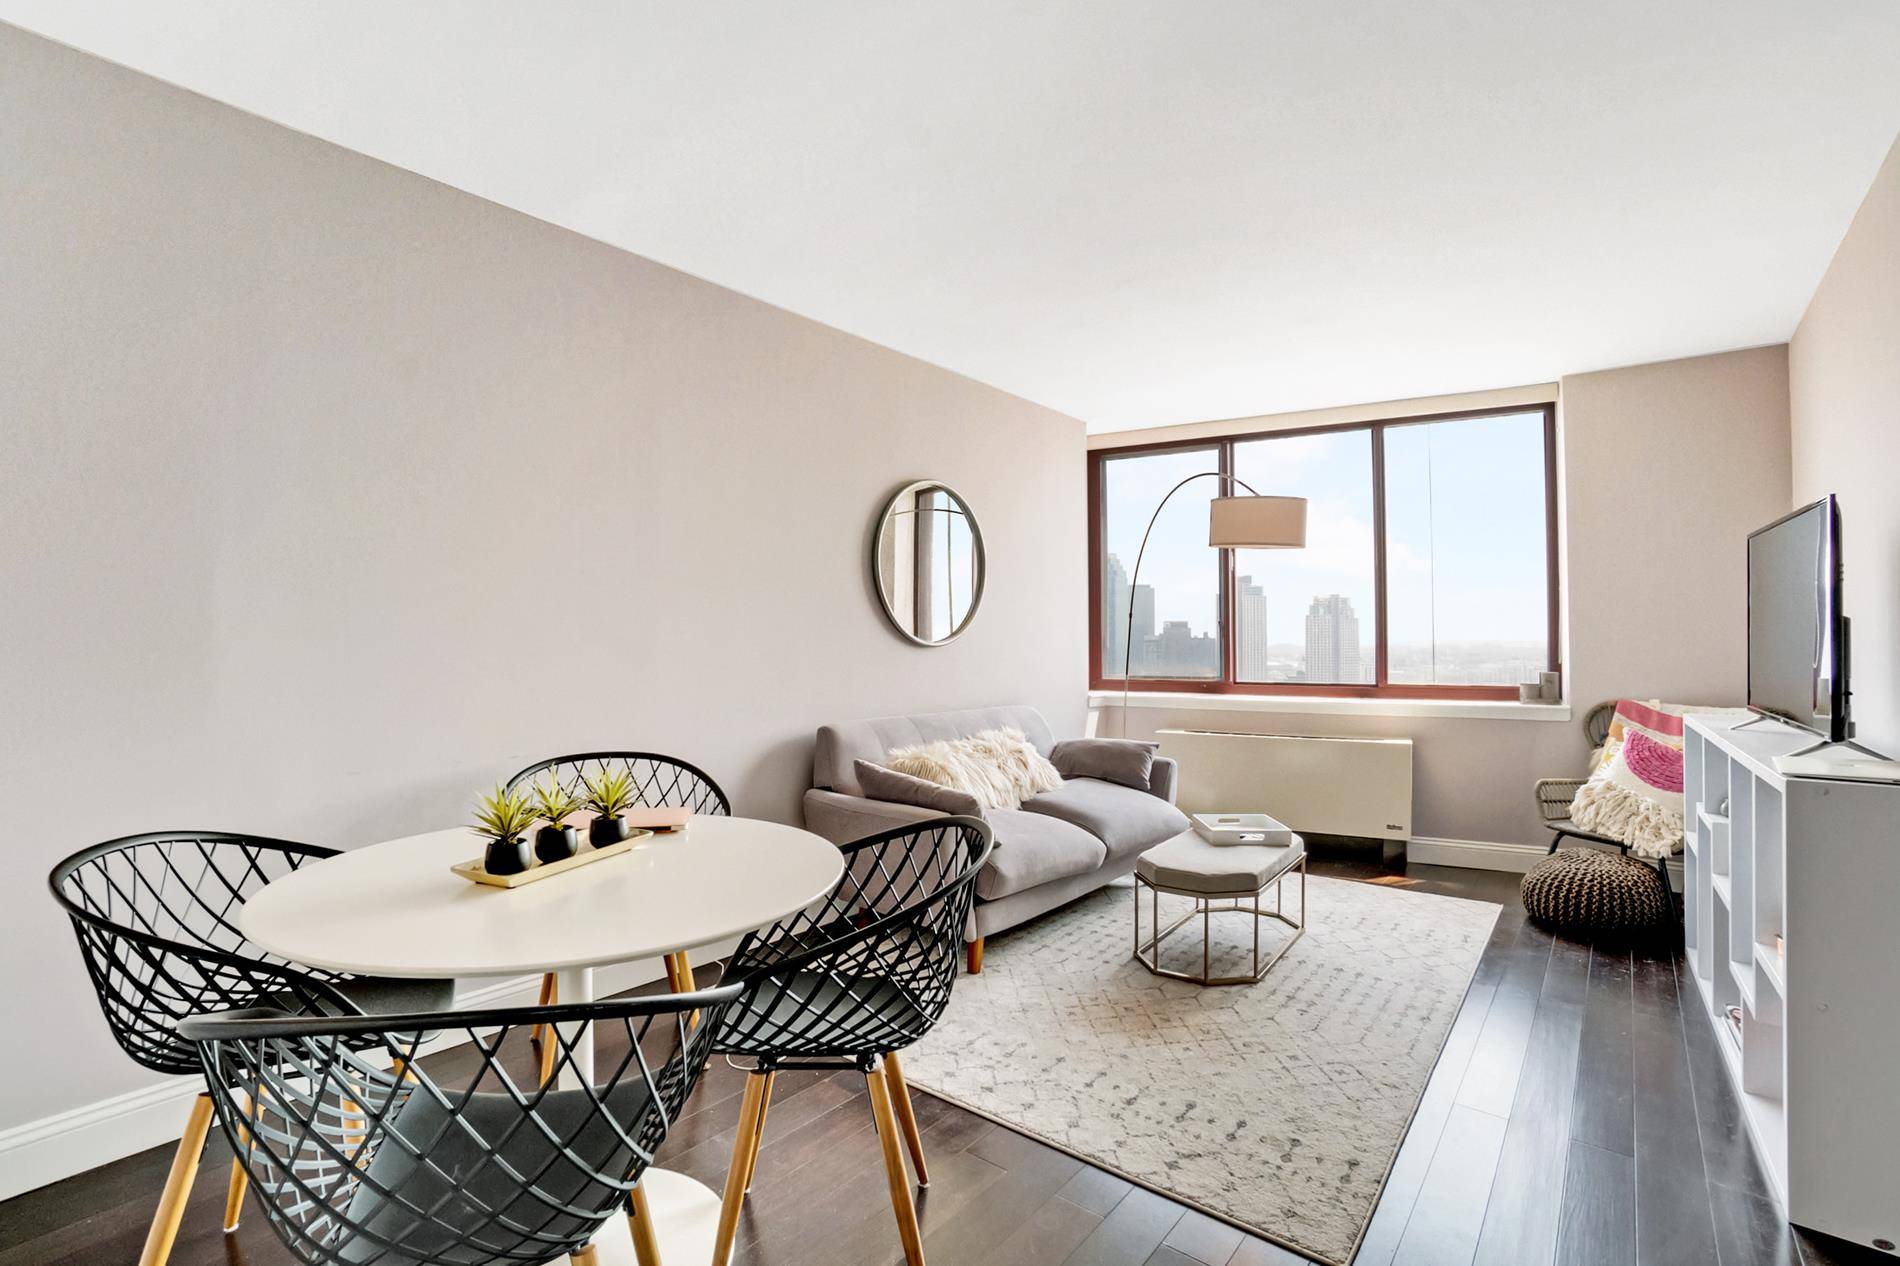 Available unfurnished 2900 mo or furnished 3200 mo Warm sunlight streams into this east facing large renovated 1 bedroom apartment with views of Queens and the Brooklyn skyline.